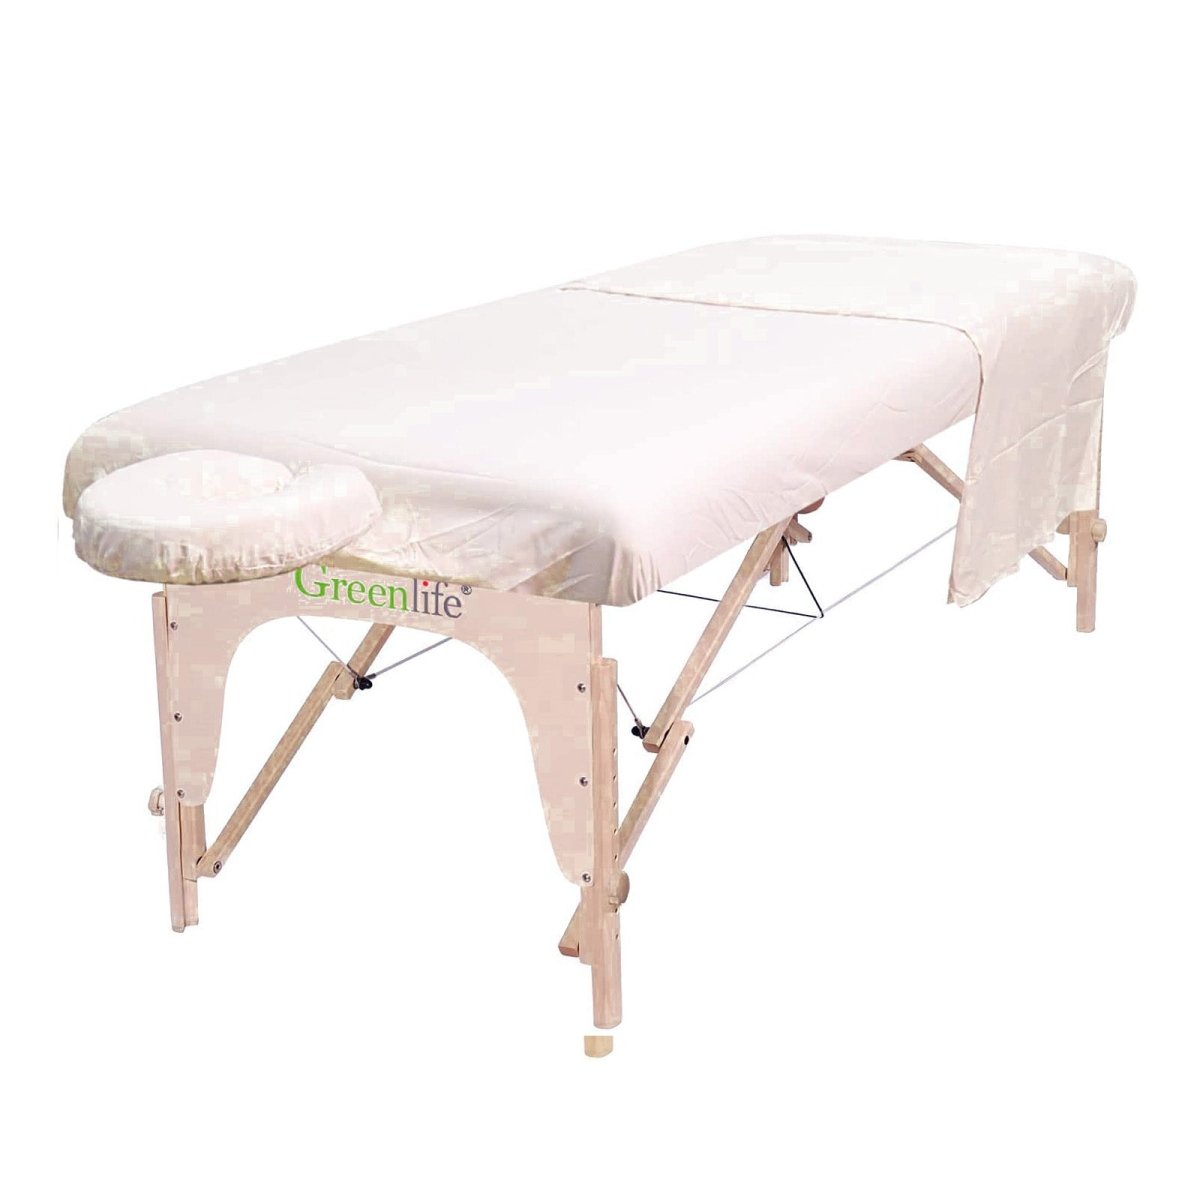 Poly-Cotton 3 Pieces Massage Table Sheet Set - Greenlife Treatment-Massage Table Sheet